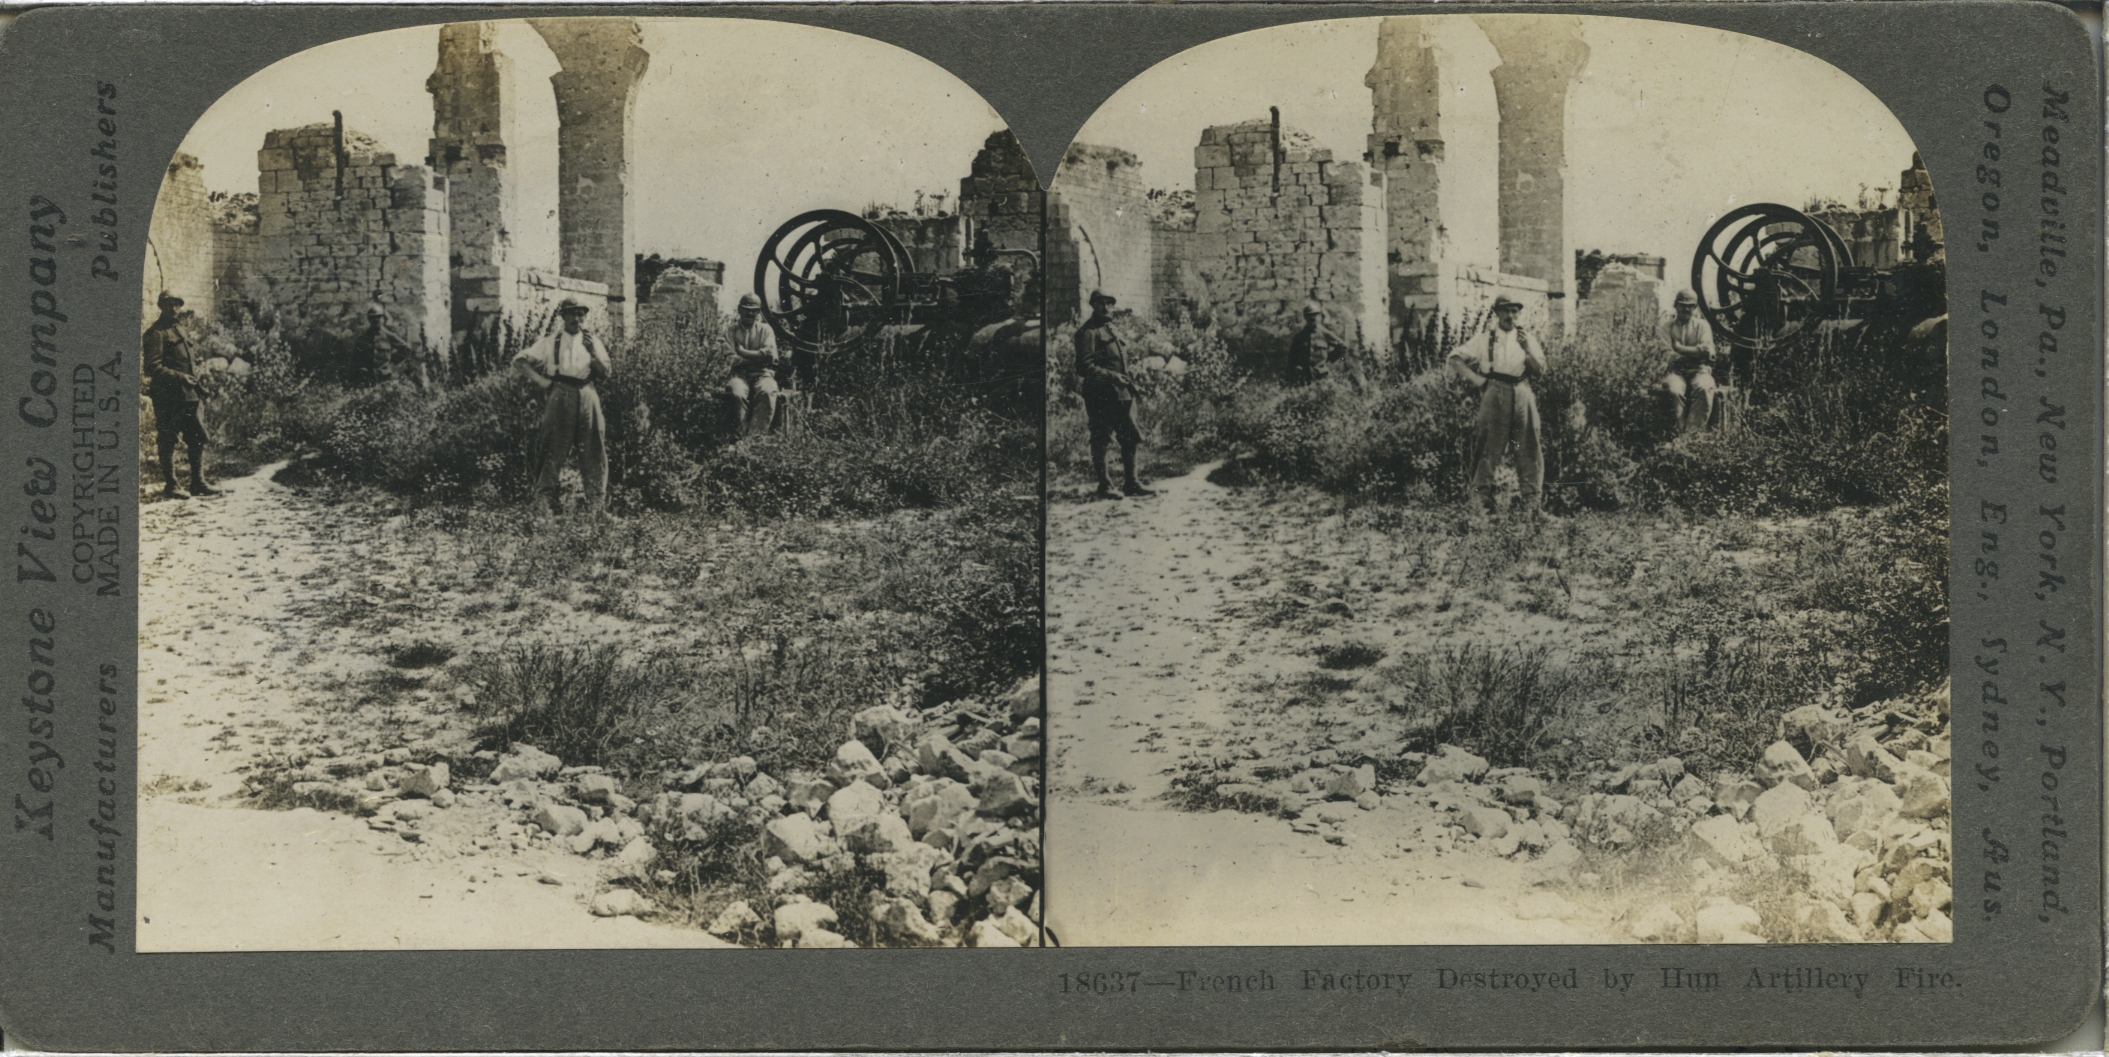 French Factory Destroyed by Hun Artillery Fire.